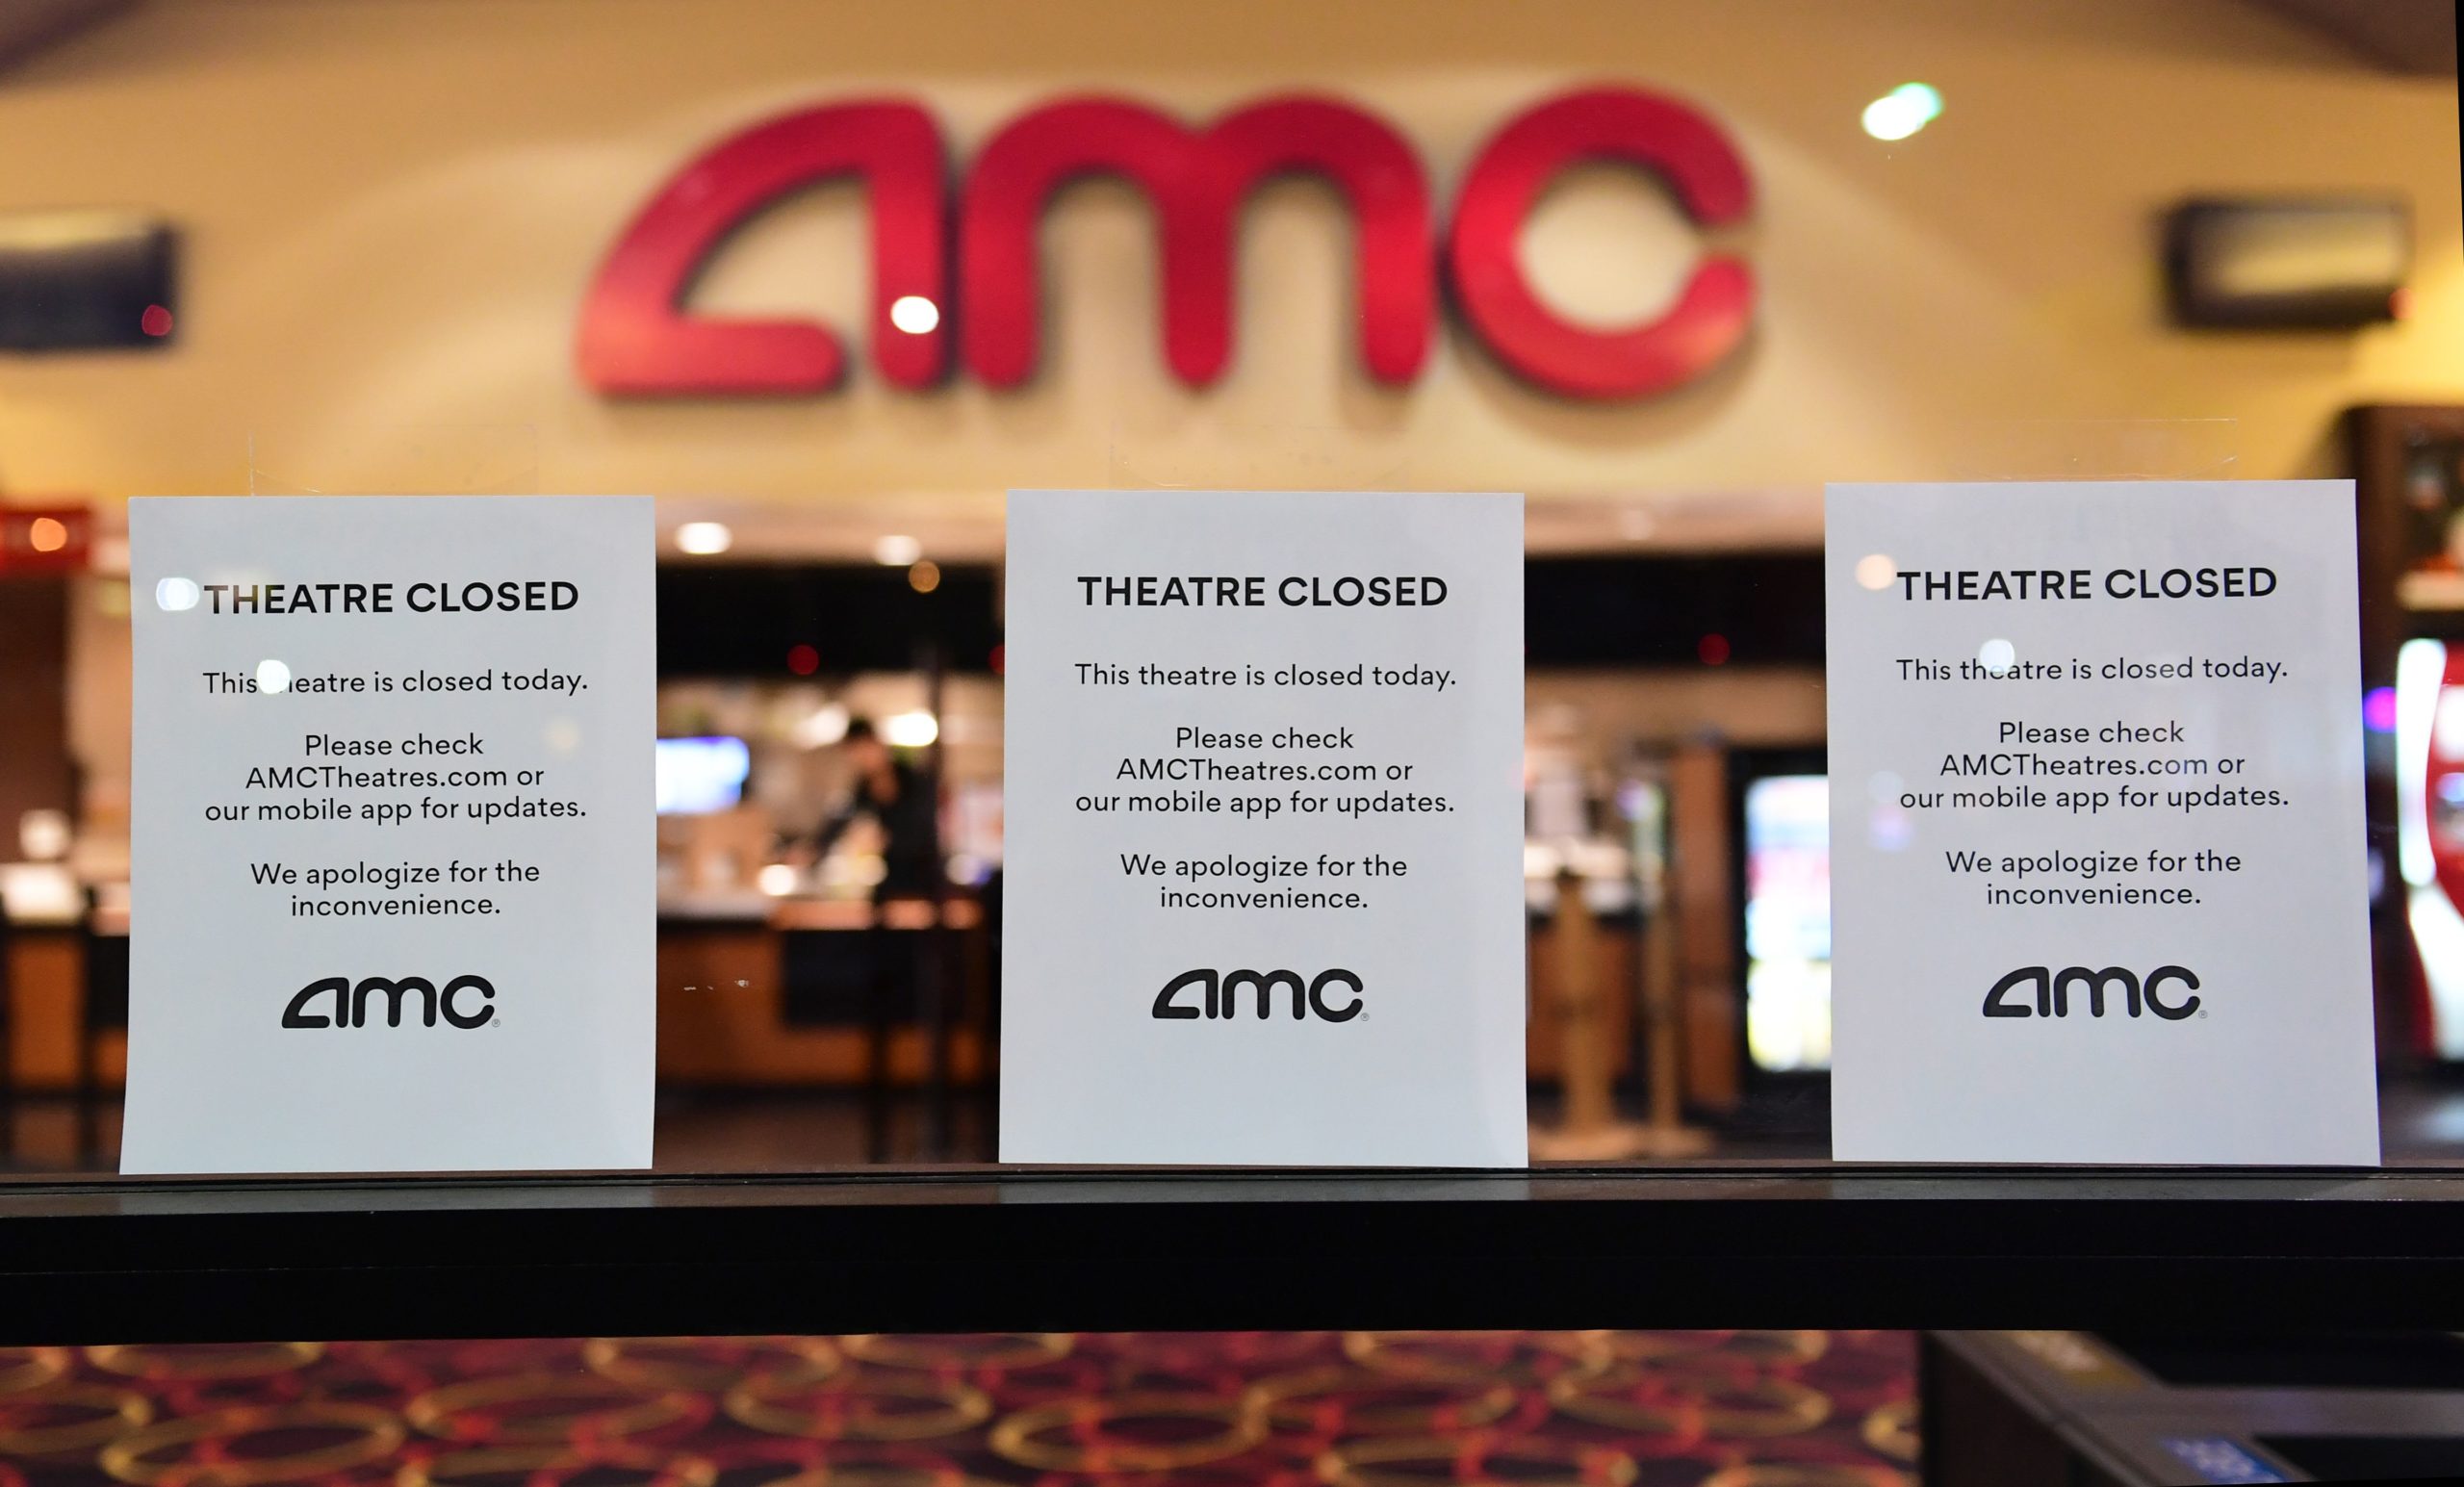 World’s largest theater chain has doubts about its future